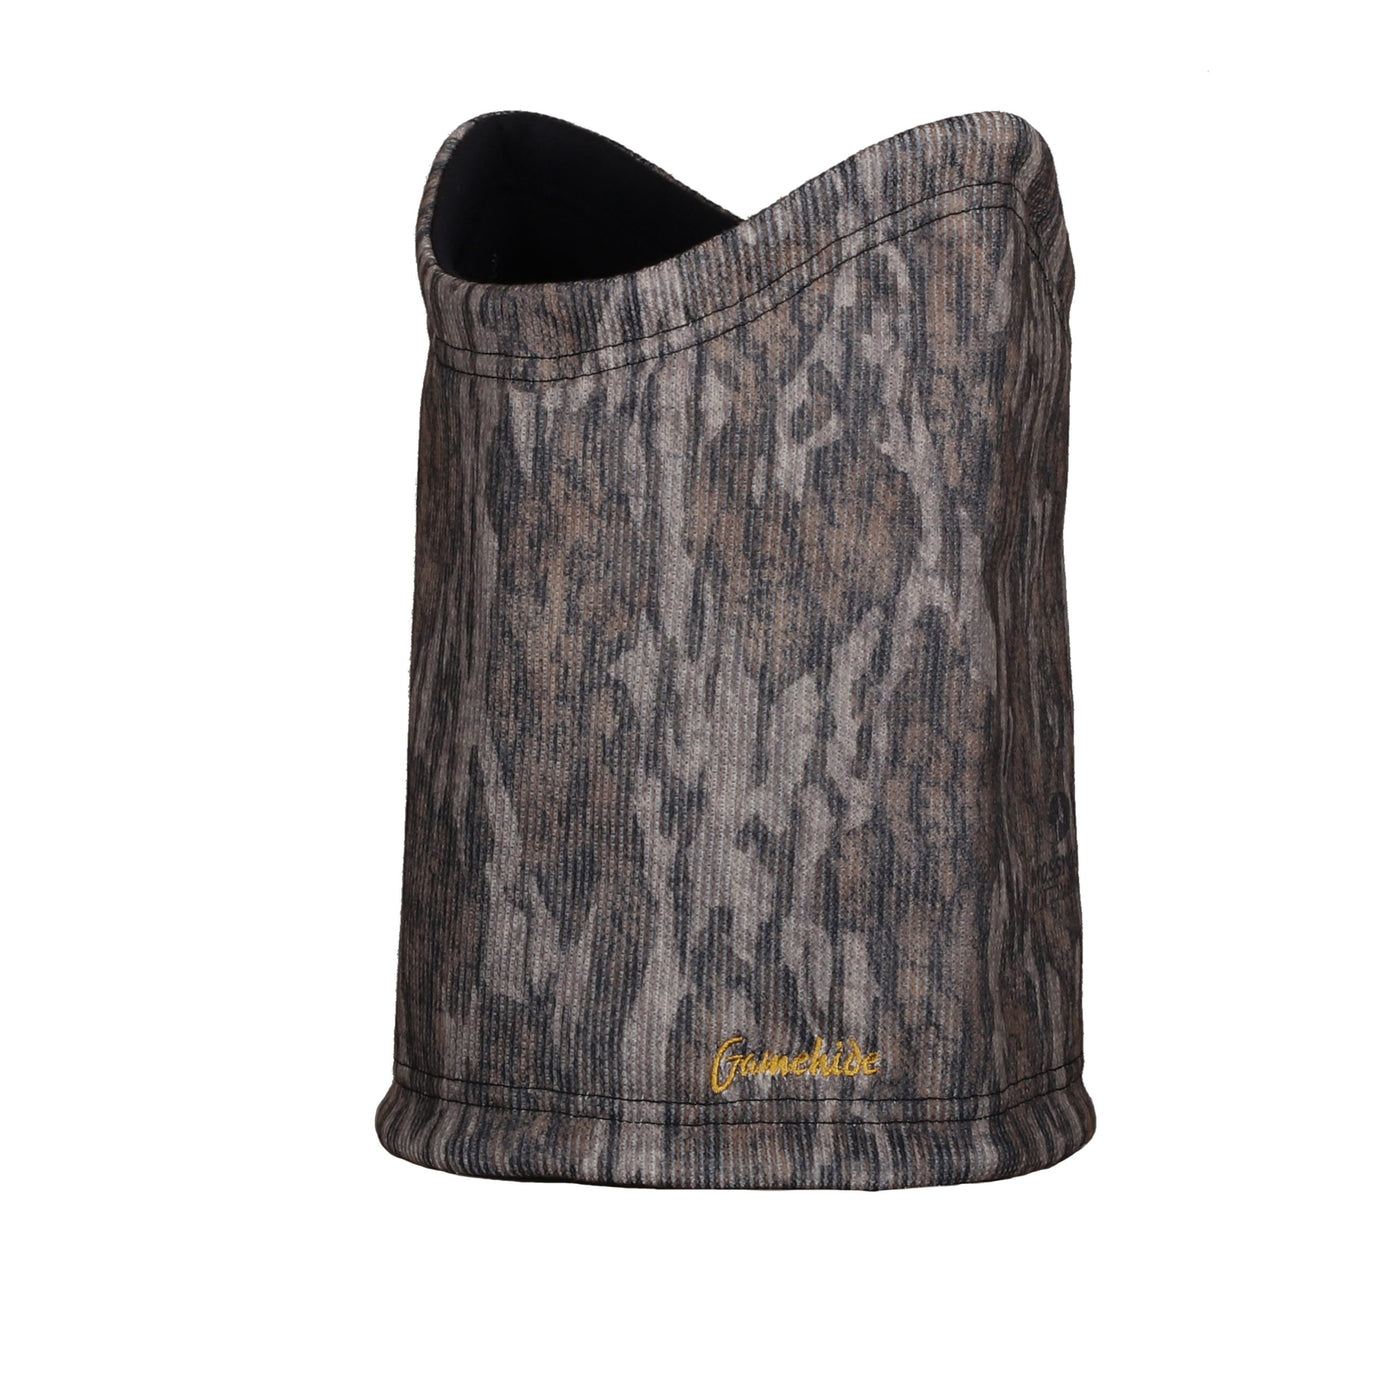 Gamehide Contoured Neck Gaiter-HUNTING/OUTDOORS-Bottomland-Kevin's Fine Outdoor Gear & Apparel